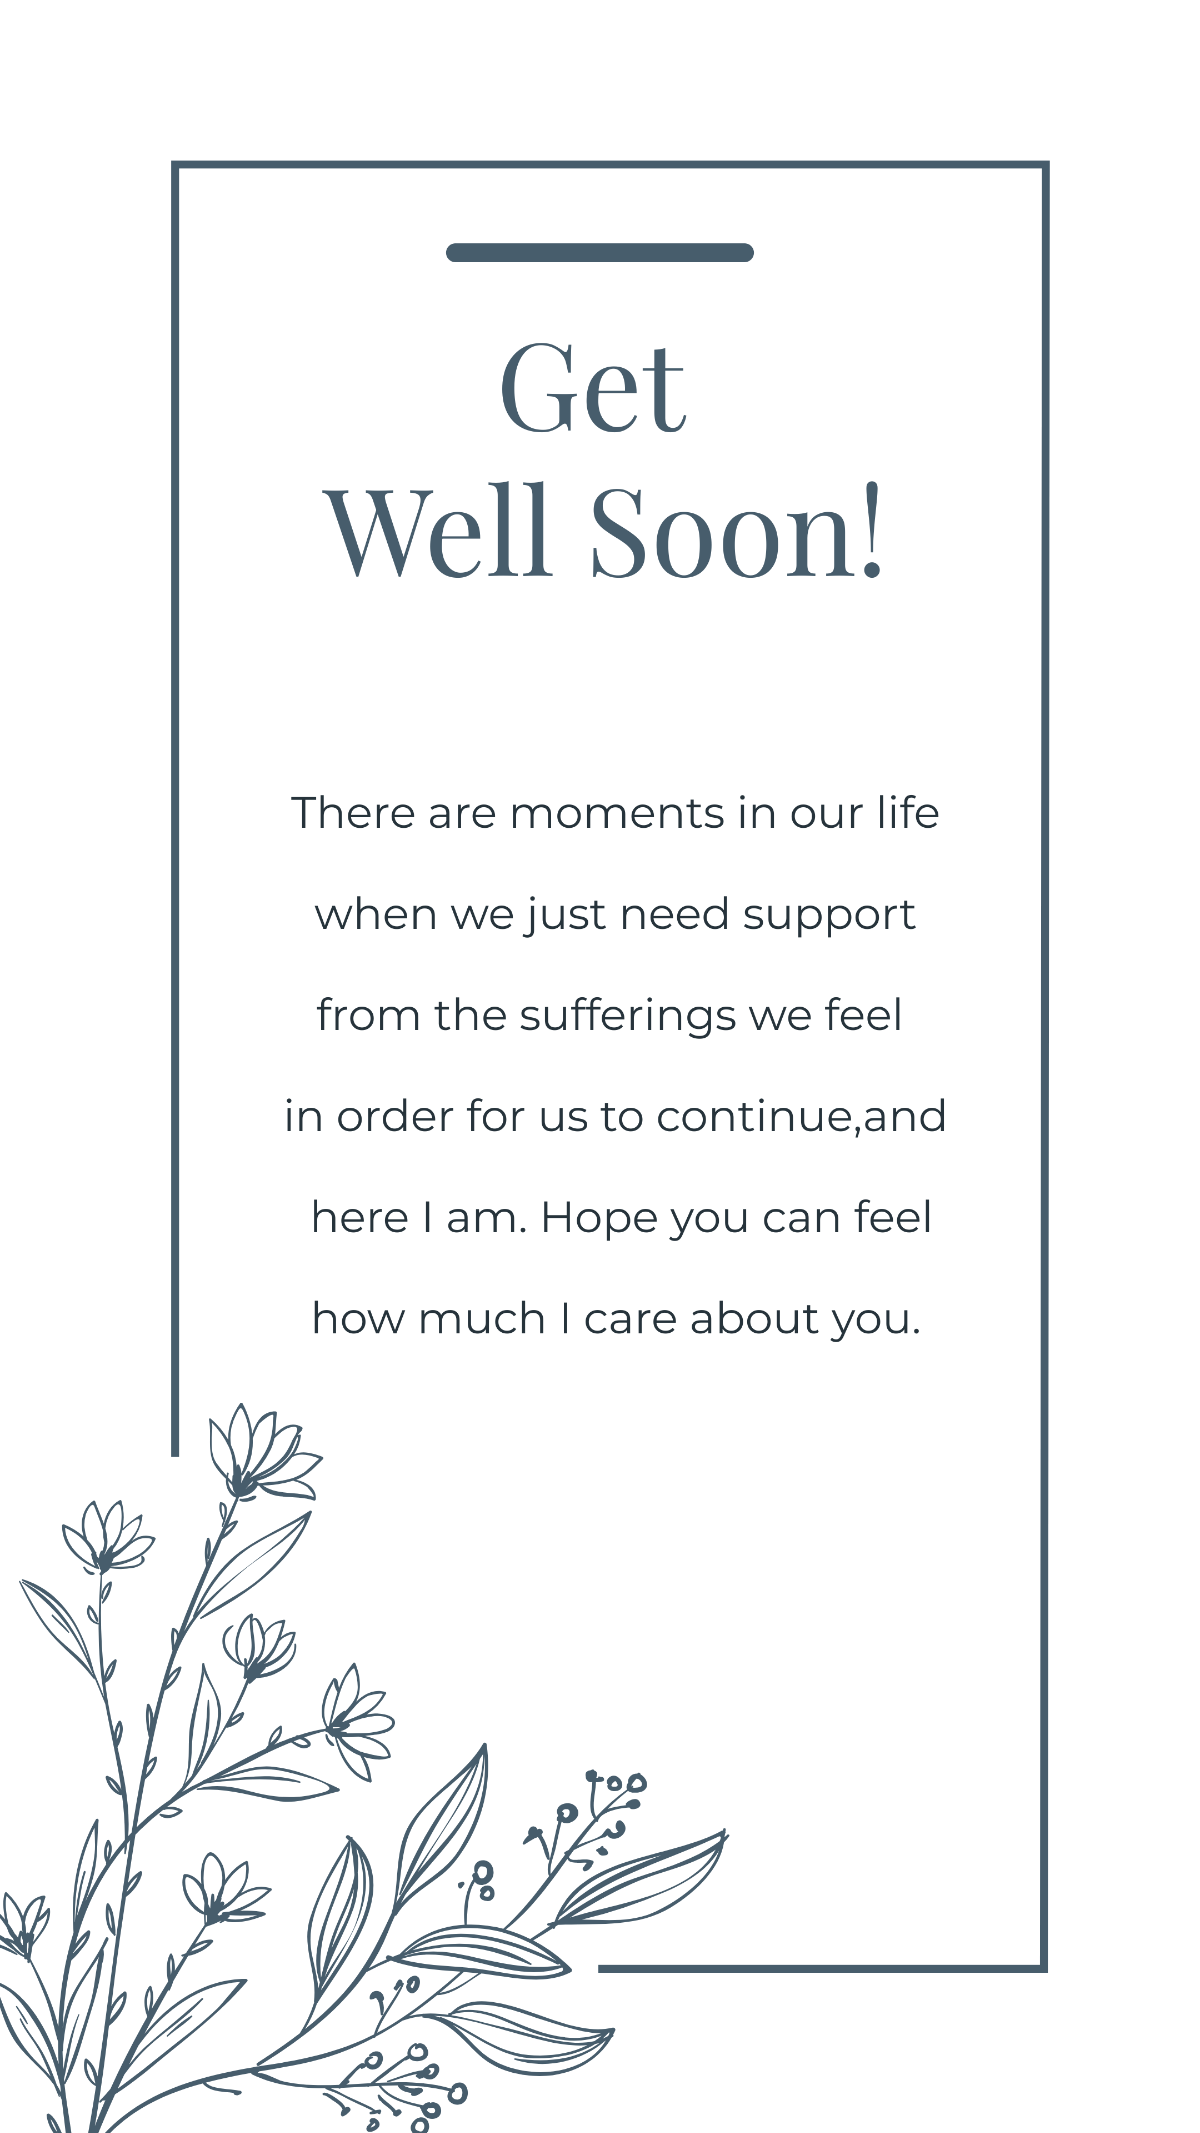 Get Well Soon Wishes Story